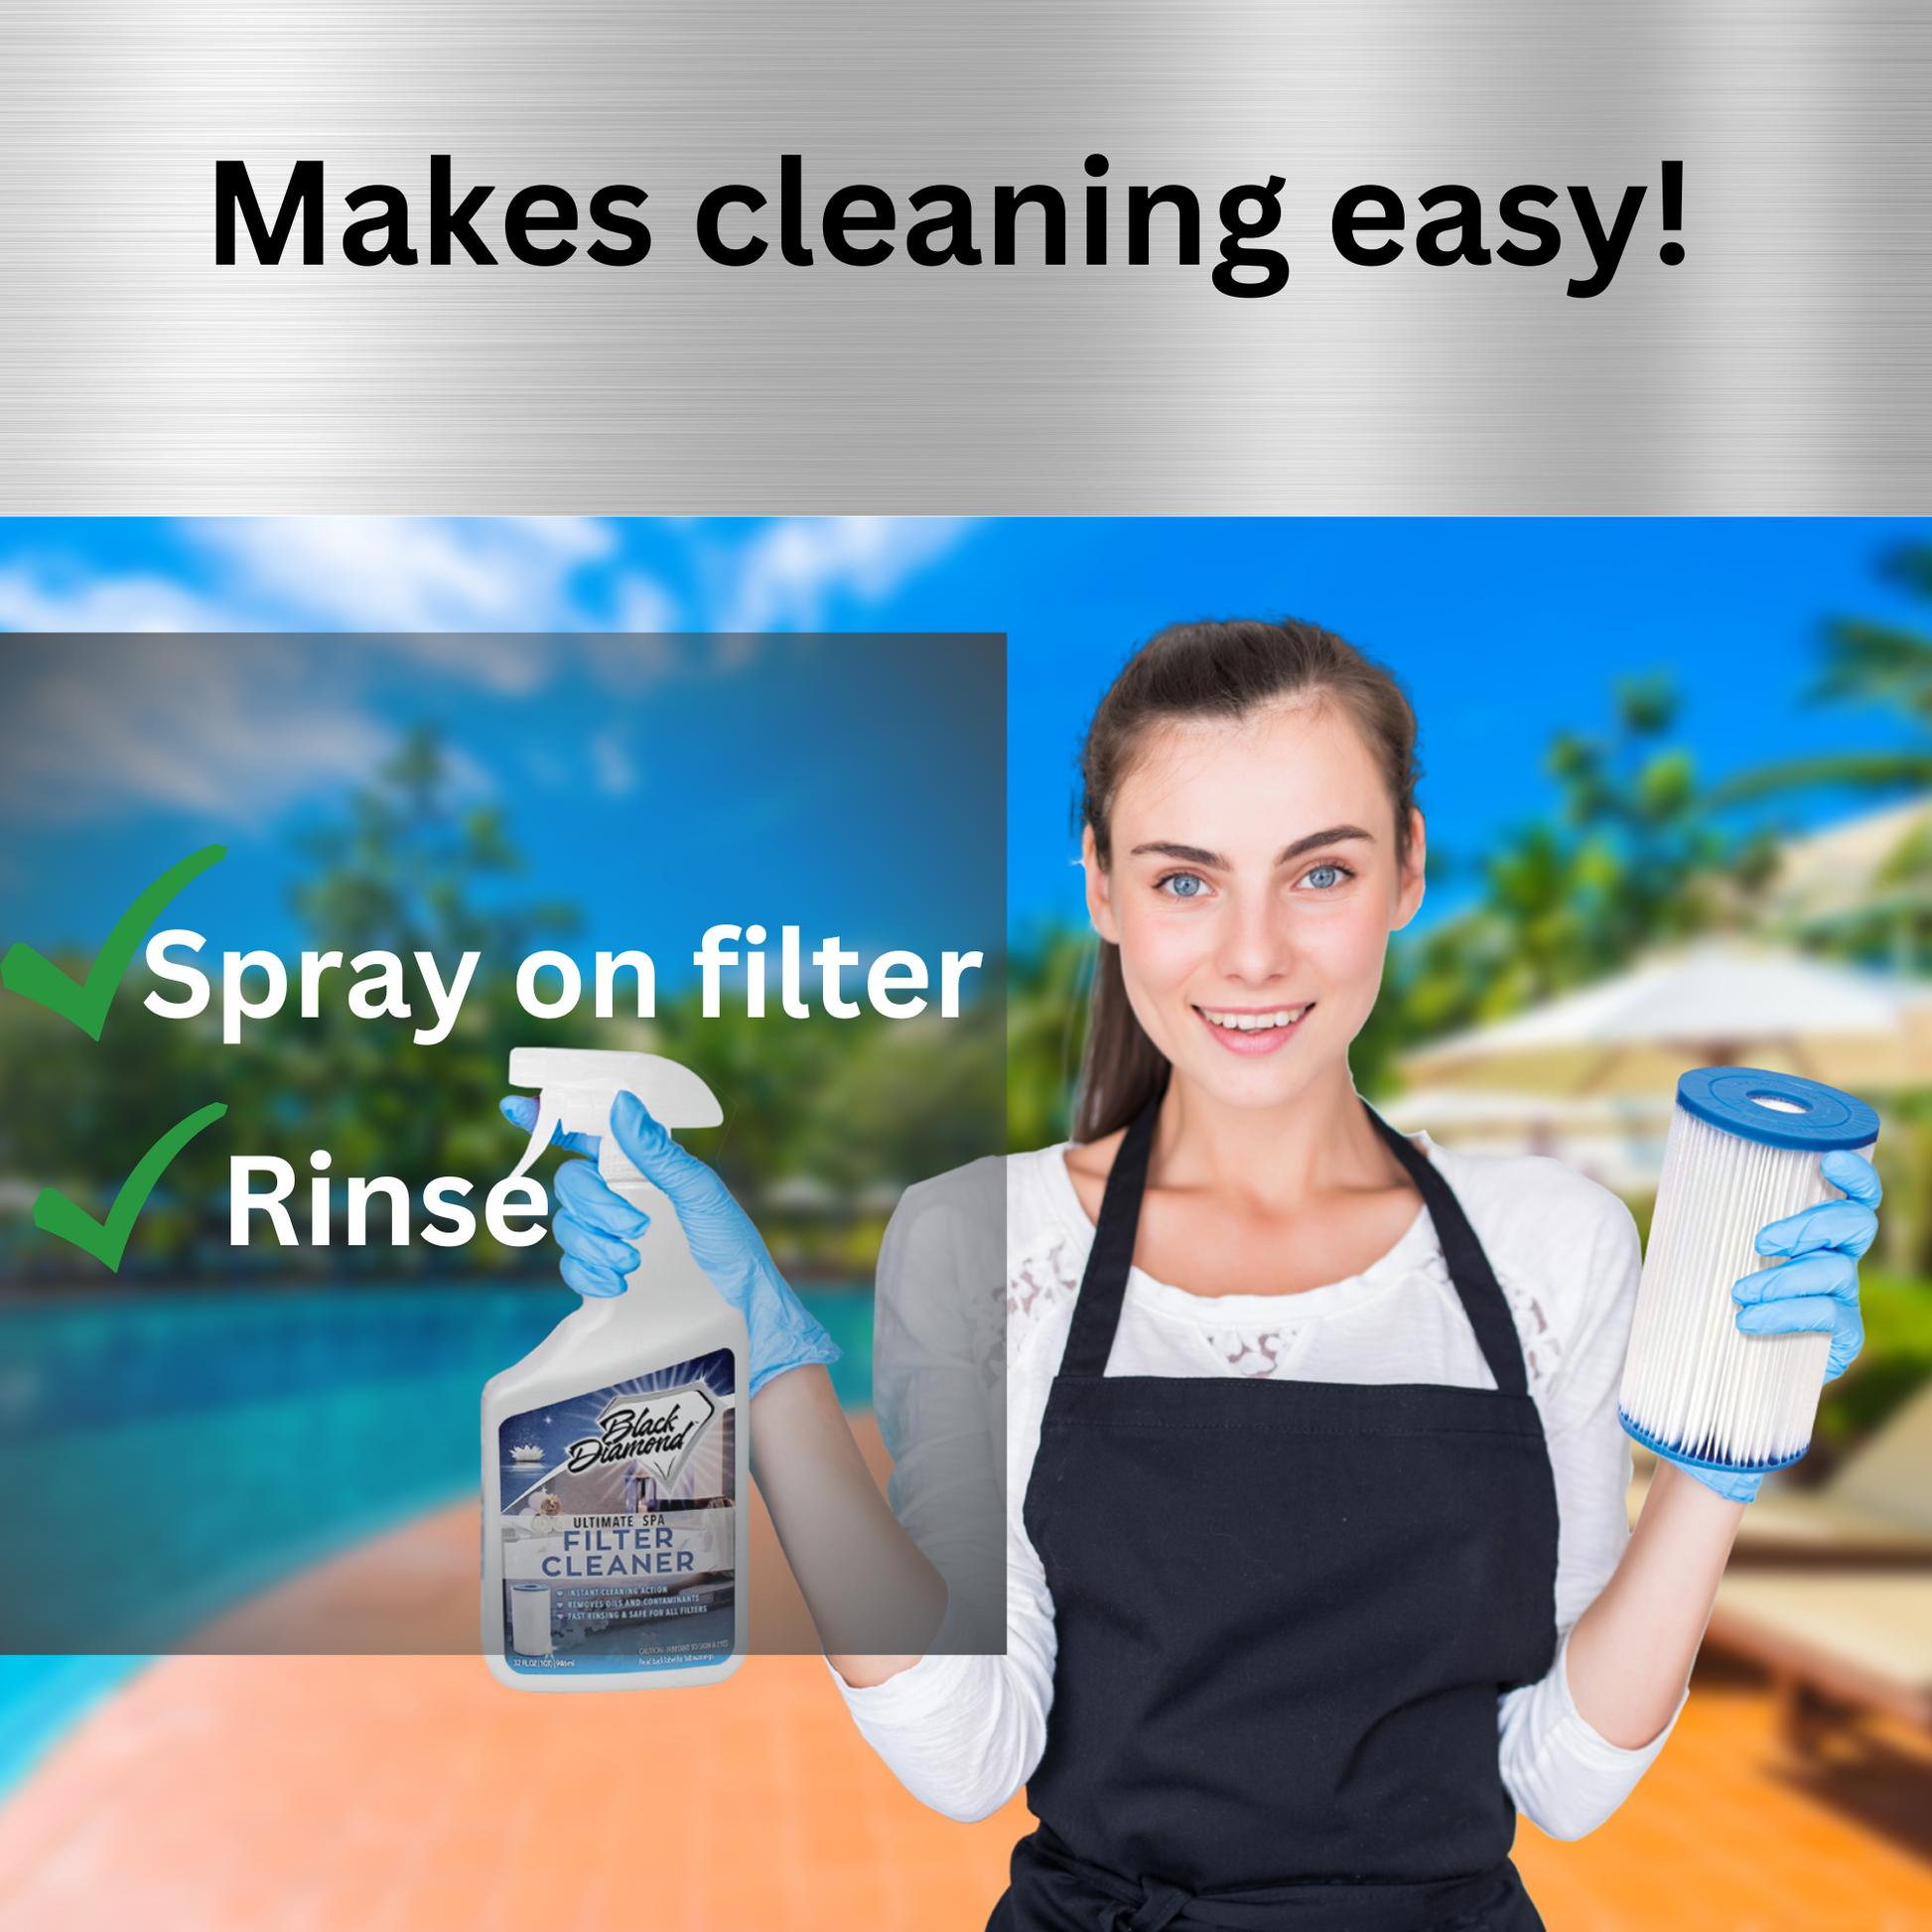 pool and Spa Filter Cleaner 